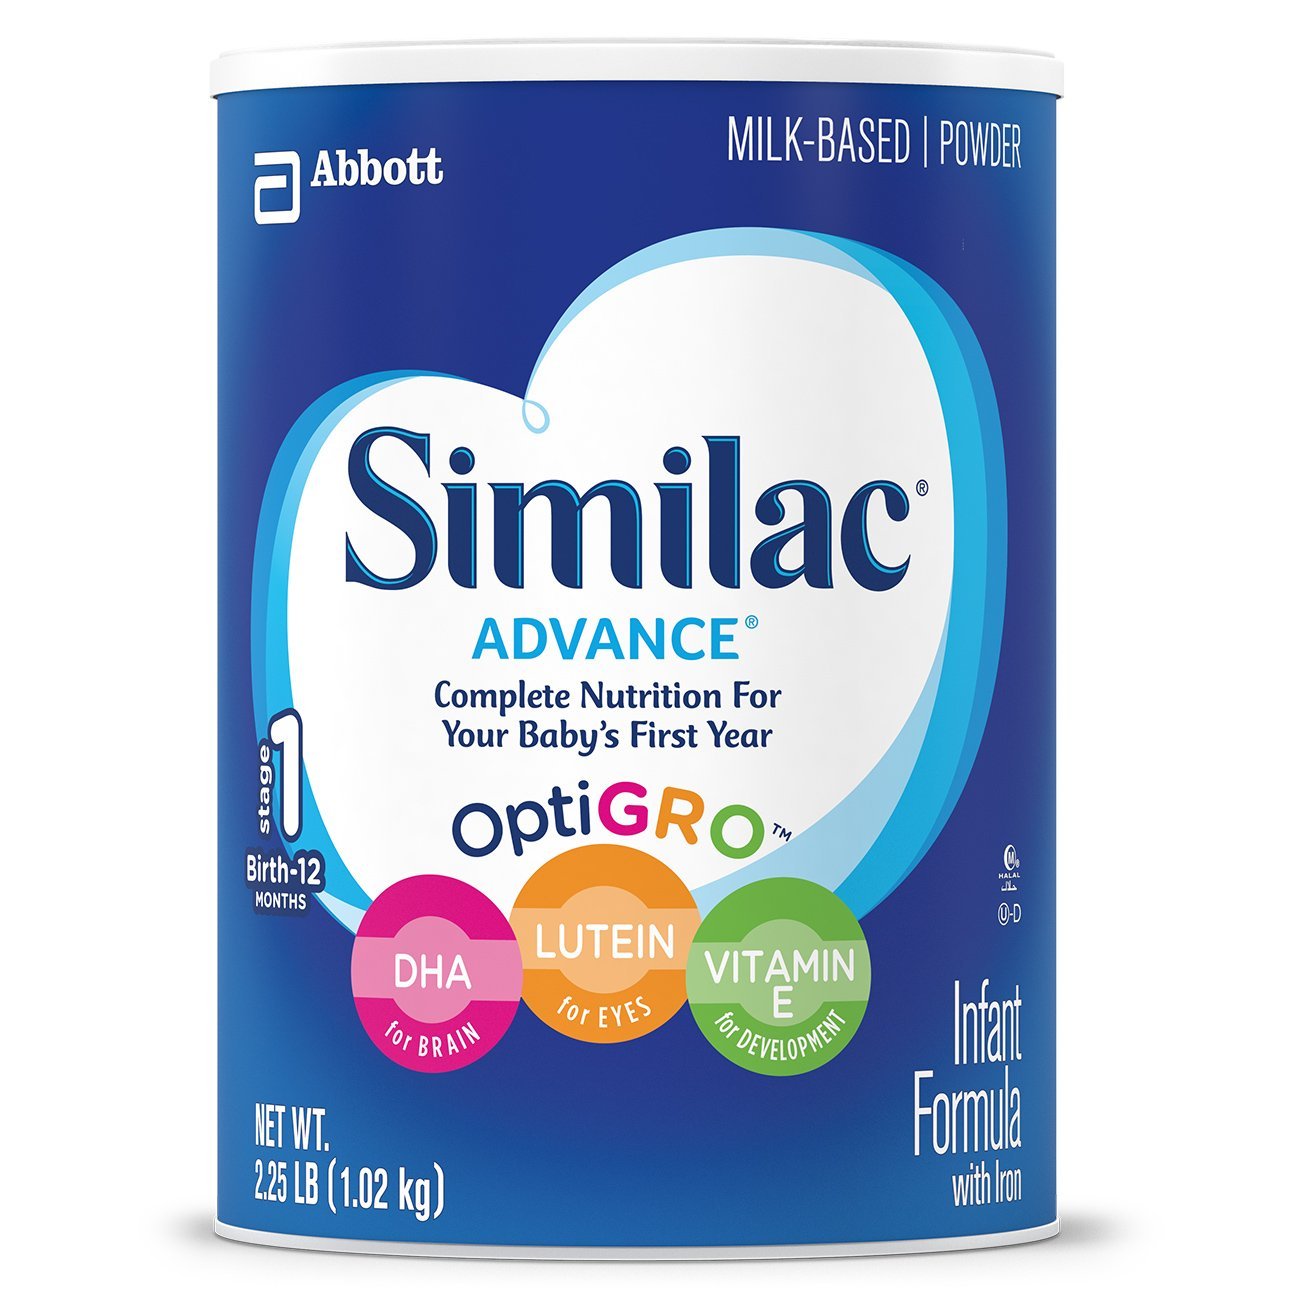 10 Best Baby Formulas for Infants Compare, Buy & Save (2019)